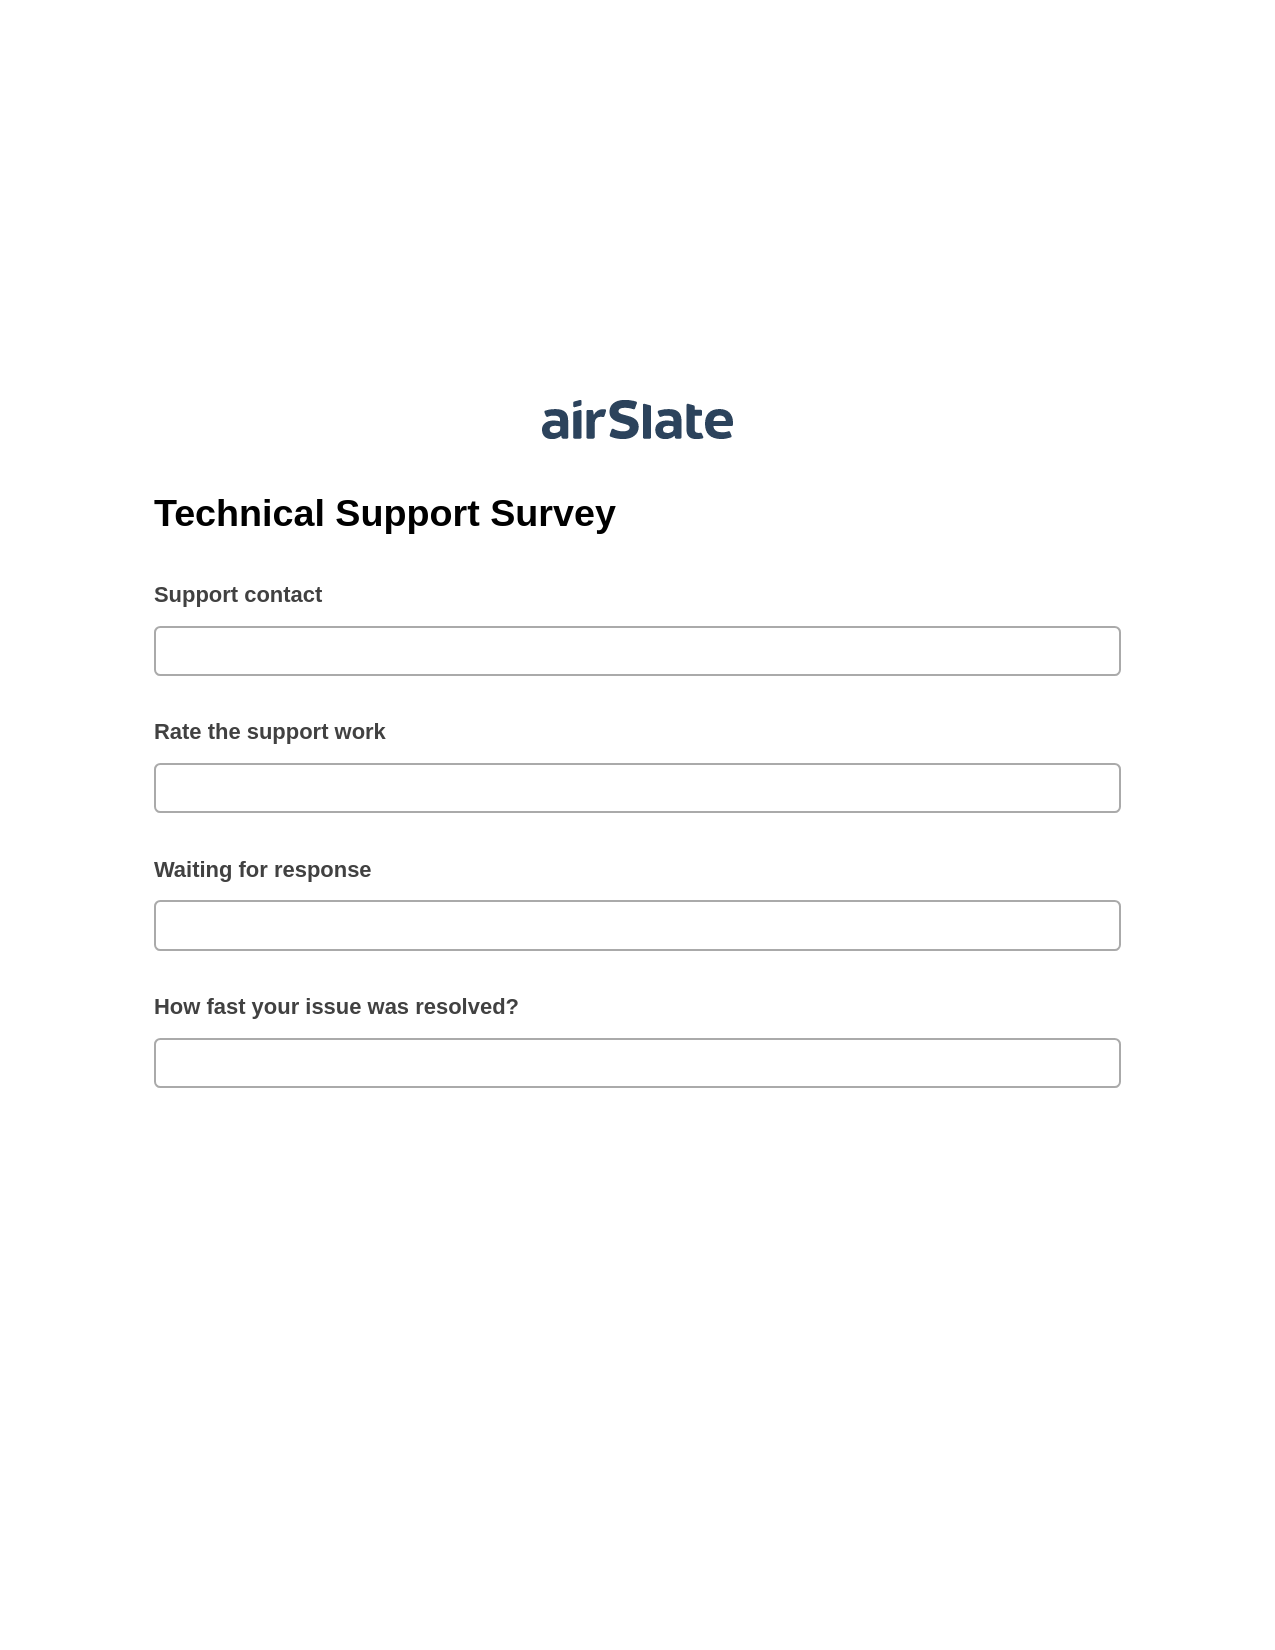 Technical Support Survey Pre-fill from Google Sheets Bot, Send a Slate to Salesforce Contact Bot, Archive to SharePoint Folder Bot